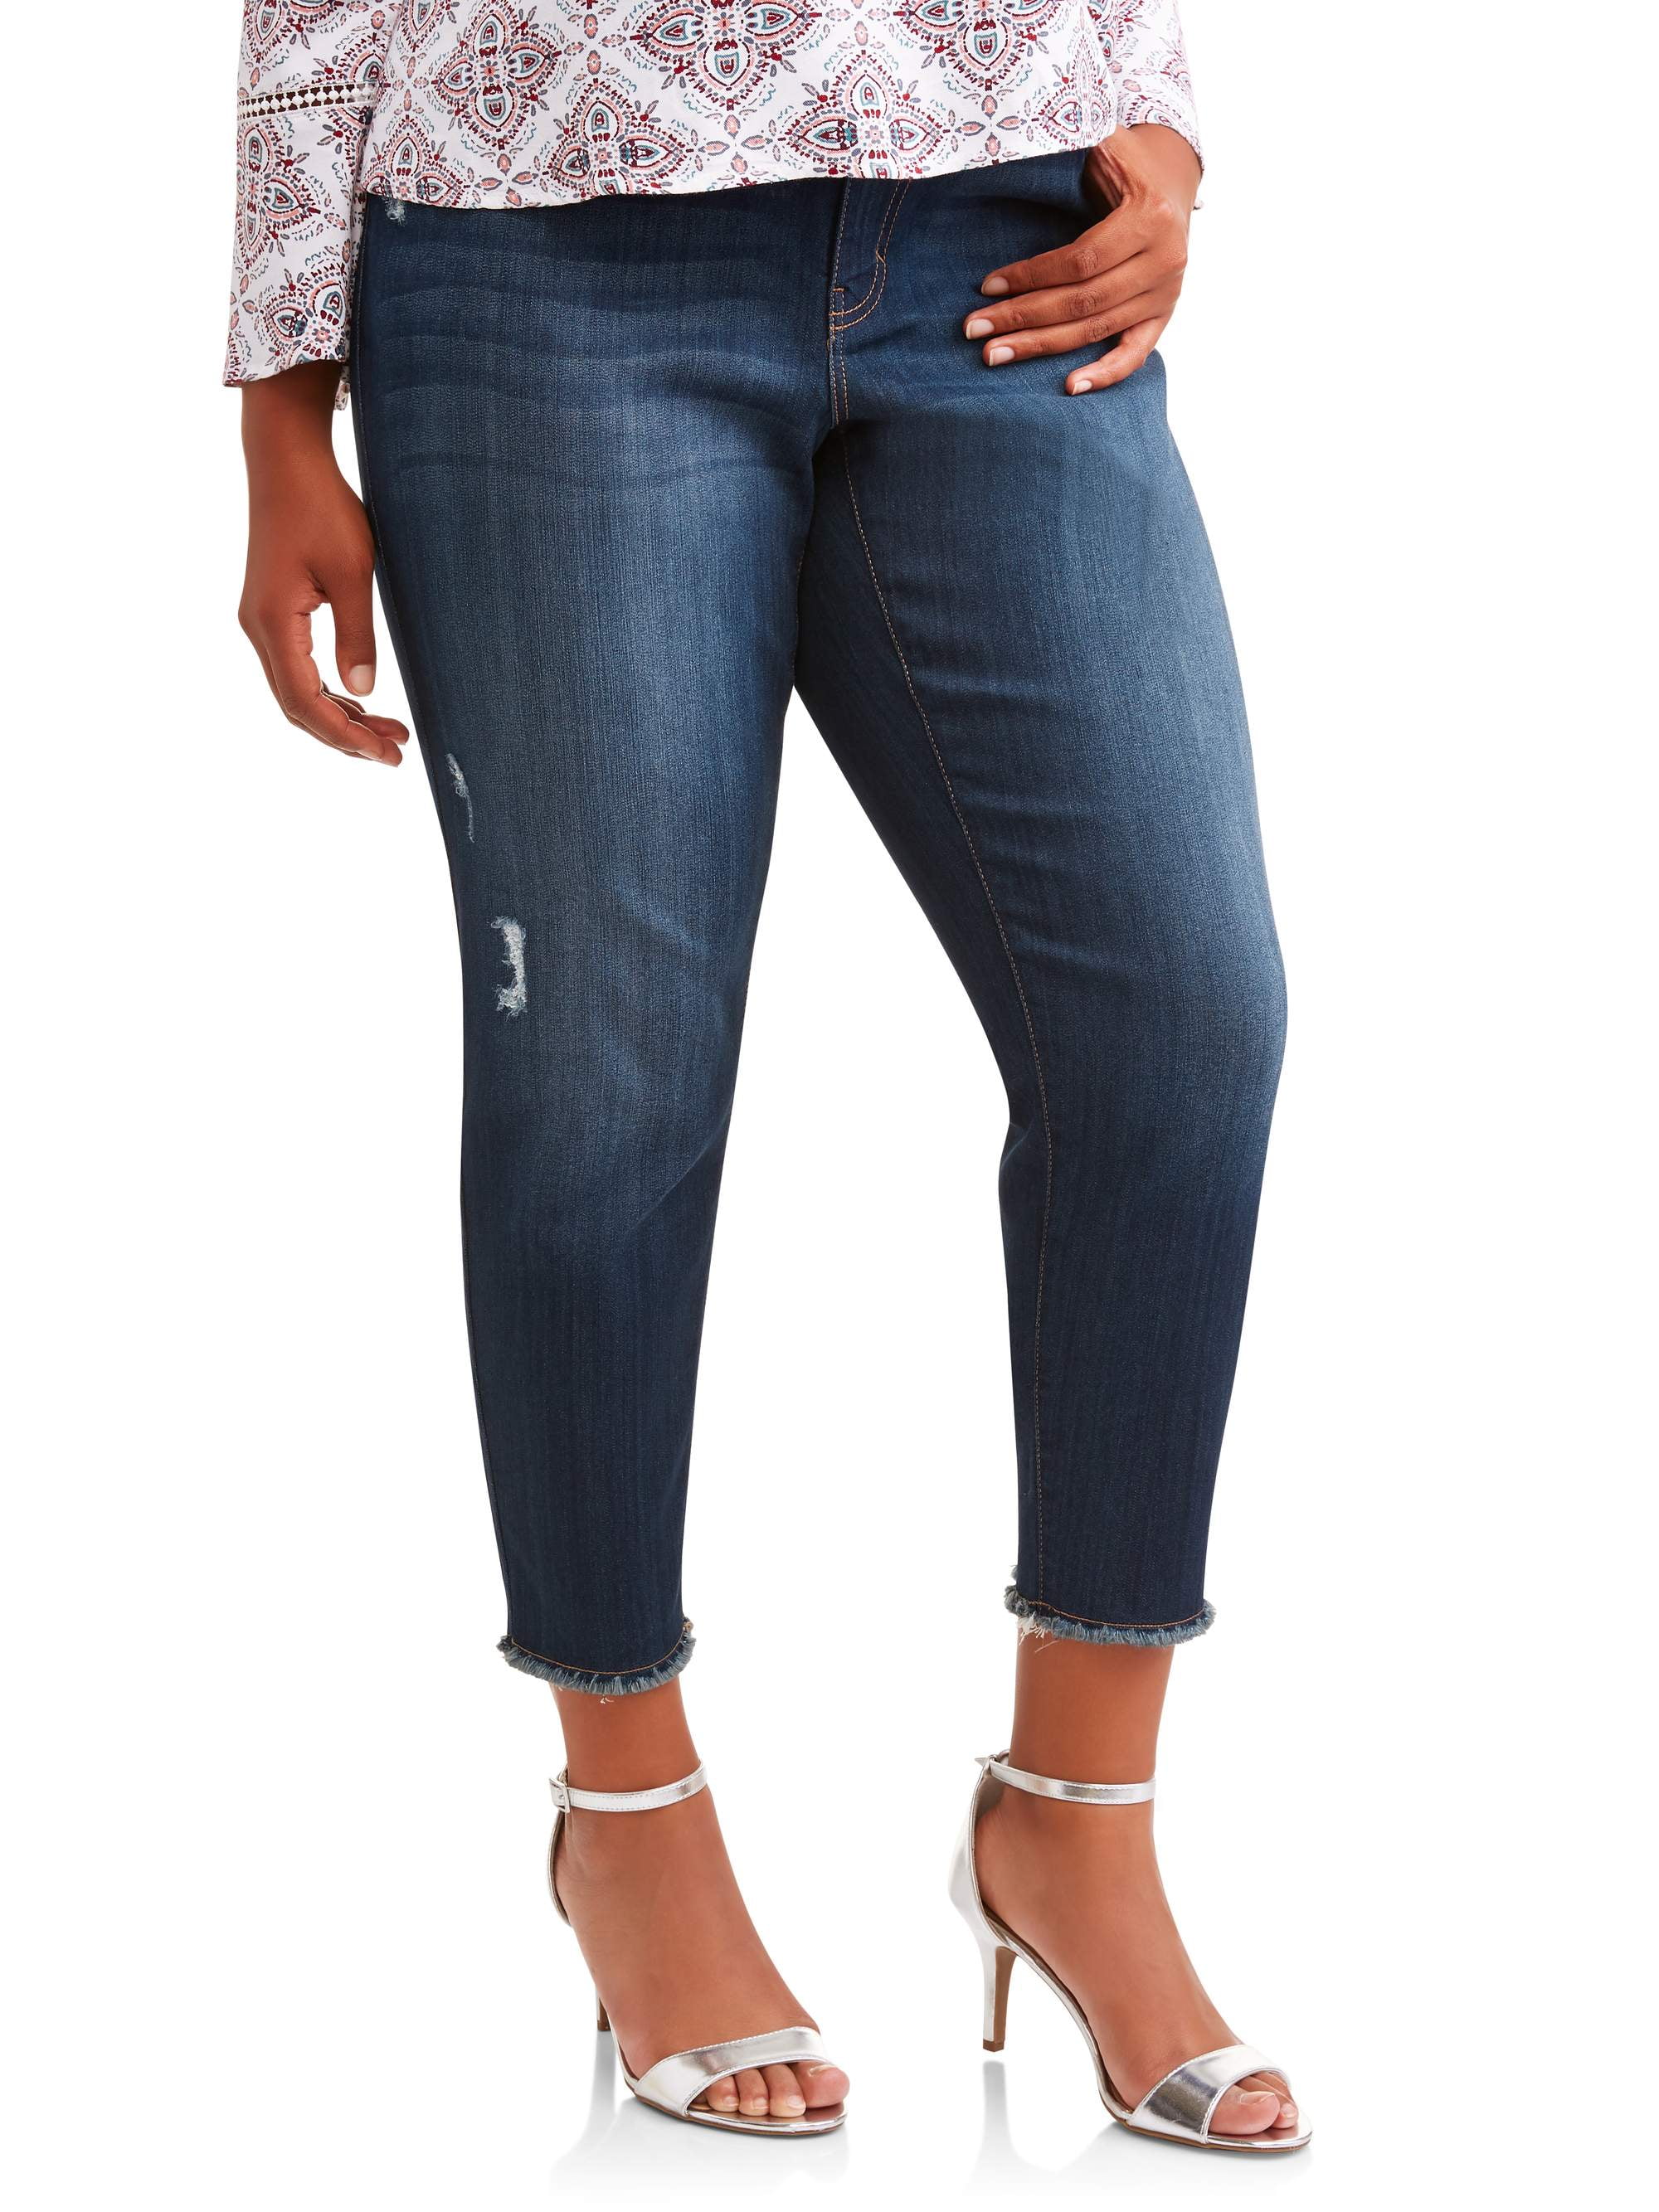 terra and sky skinny ankle jeans